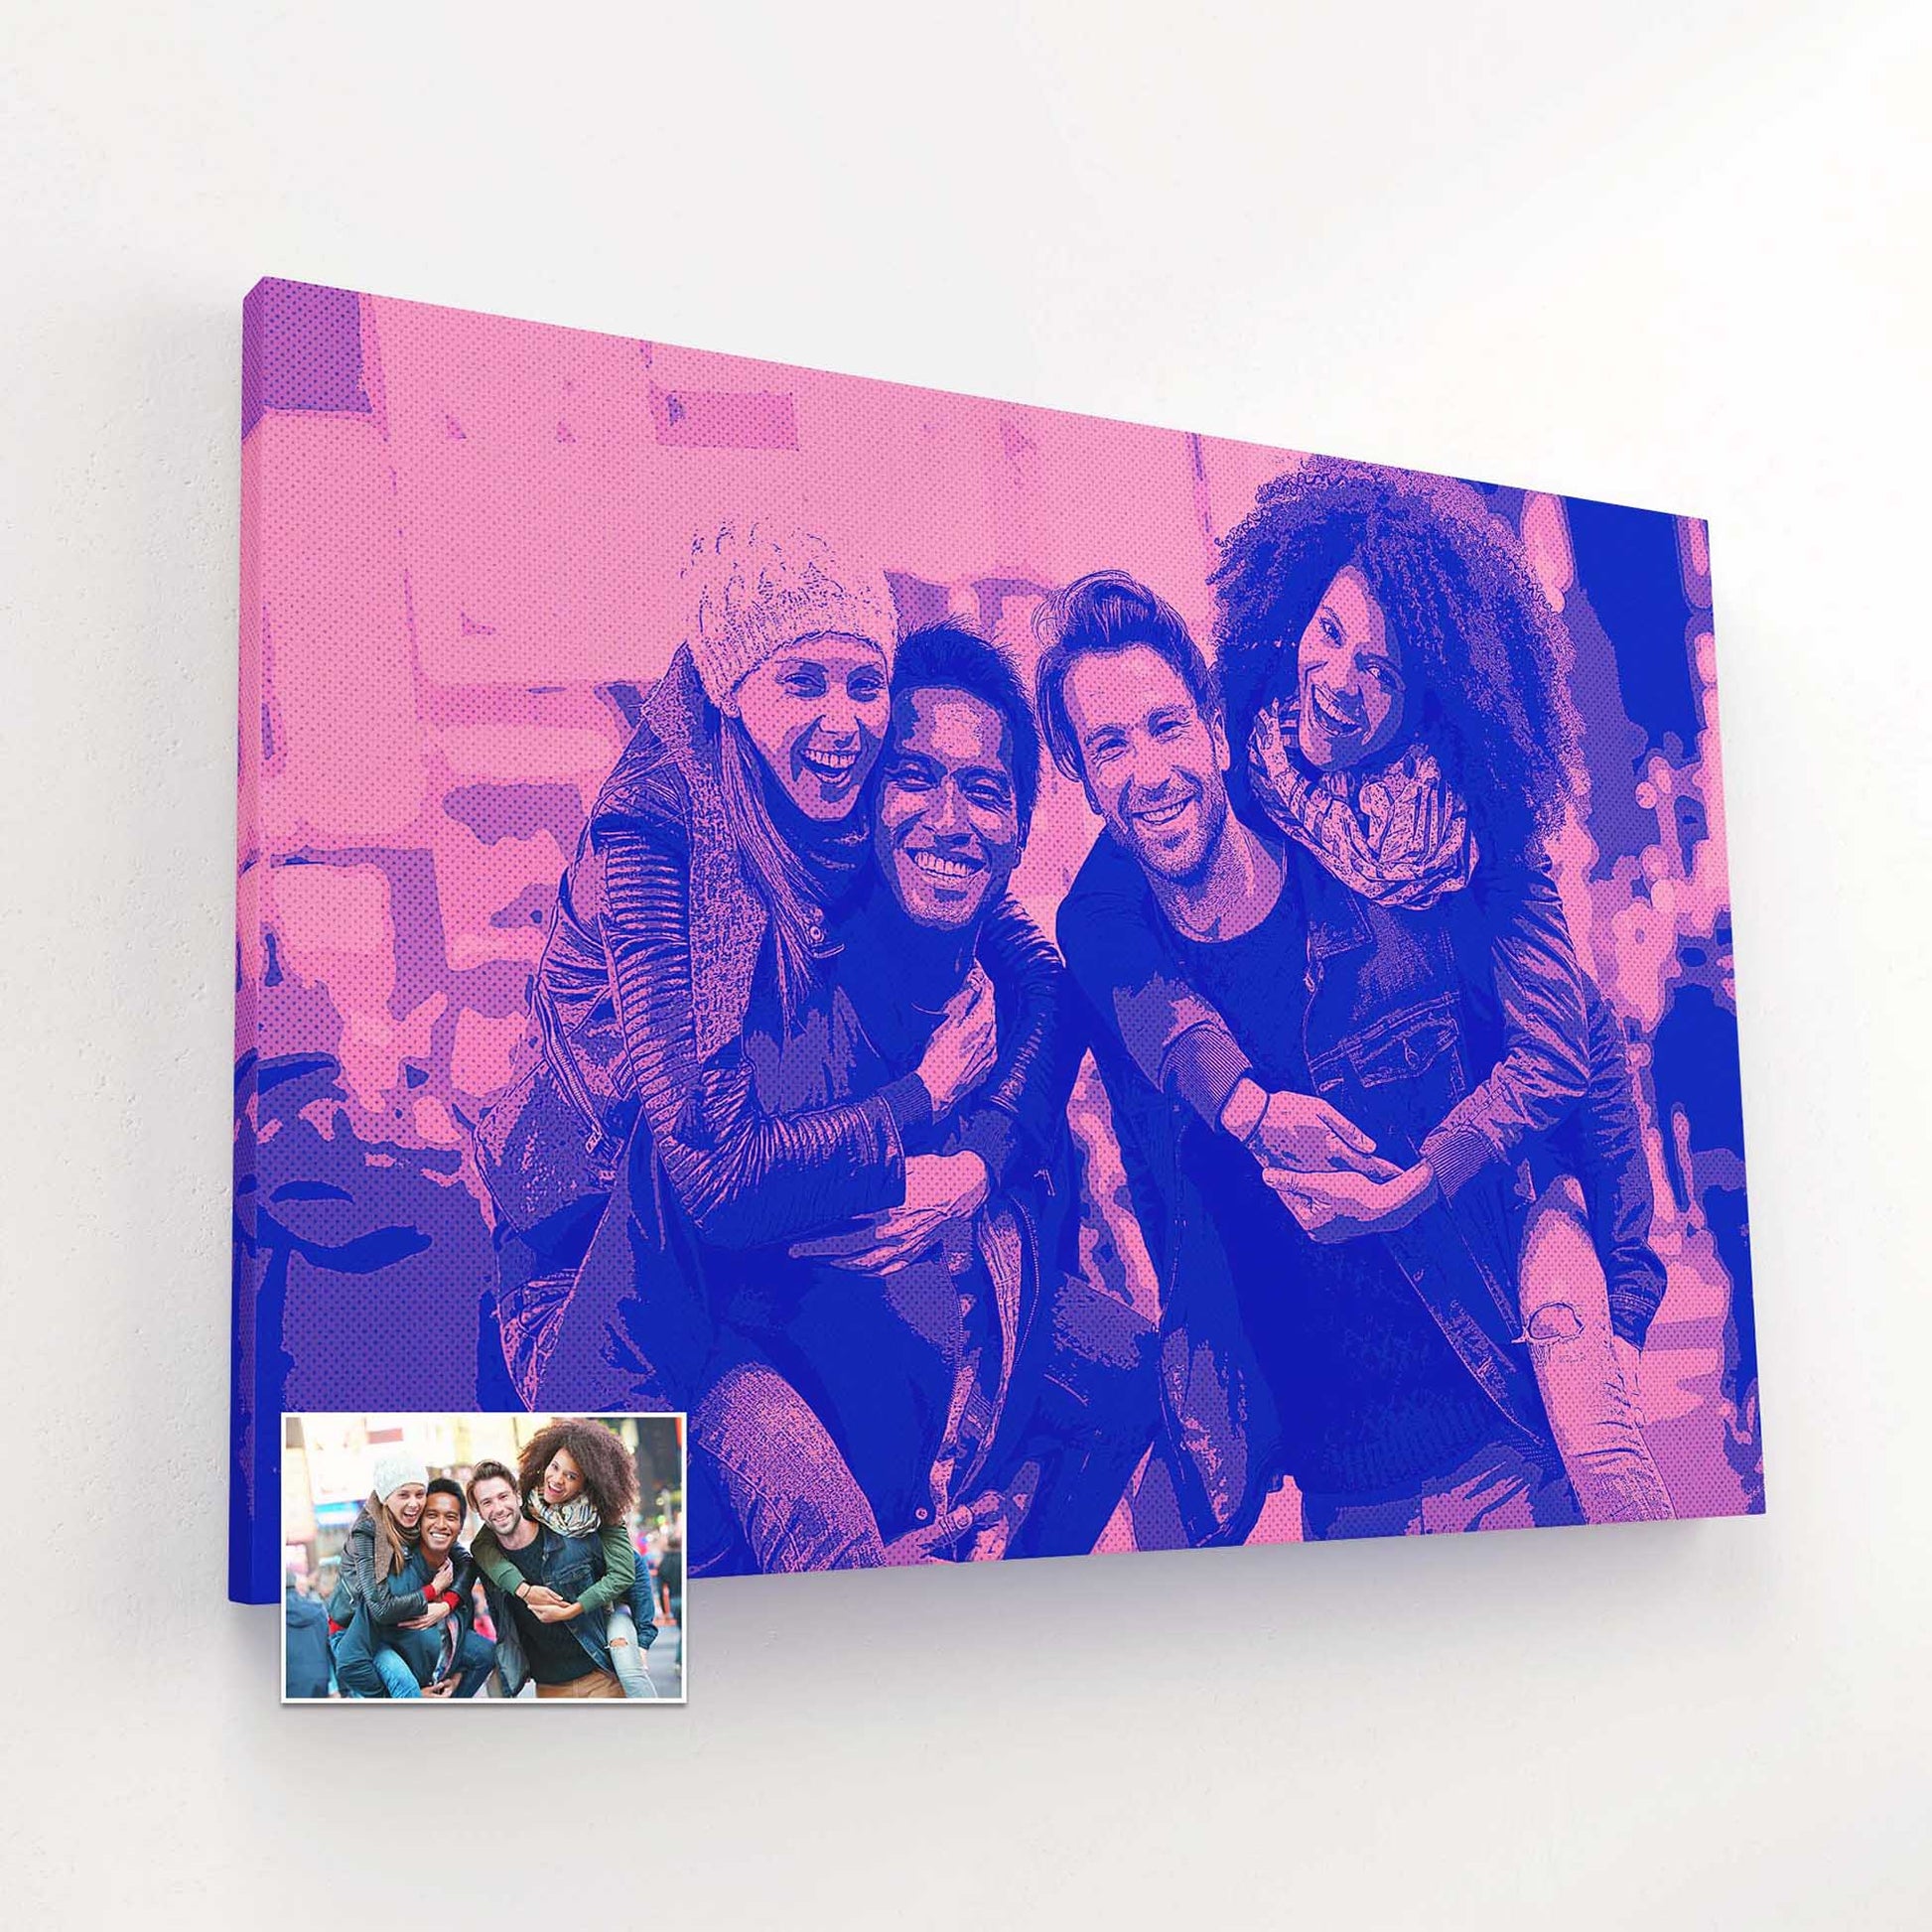 Elevate your space with the visually stunning Personalised Purple & Pink Comic Cartoon Canvas. Our talented artists transform your photos into retro-style cartoons bursting with vibrant energy. Each canvas is a creative and artistic